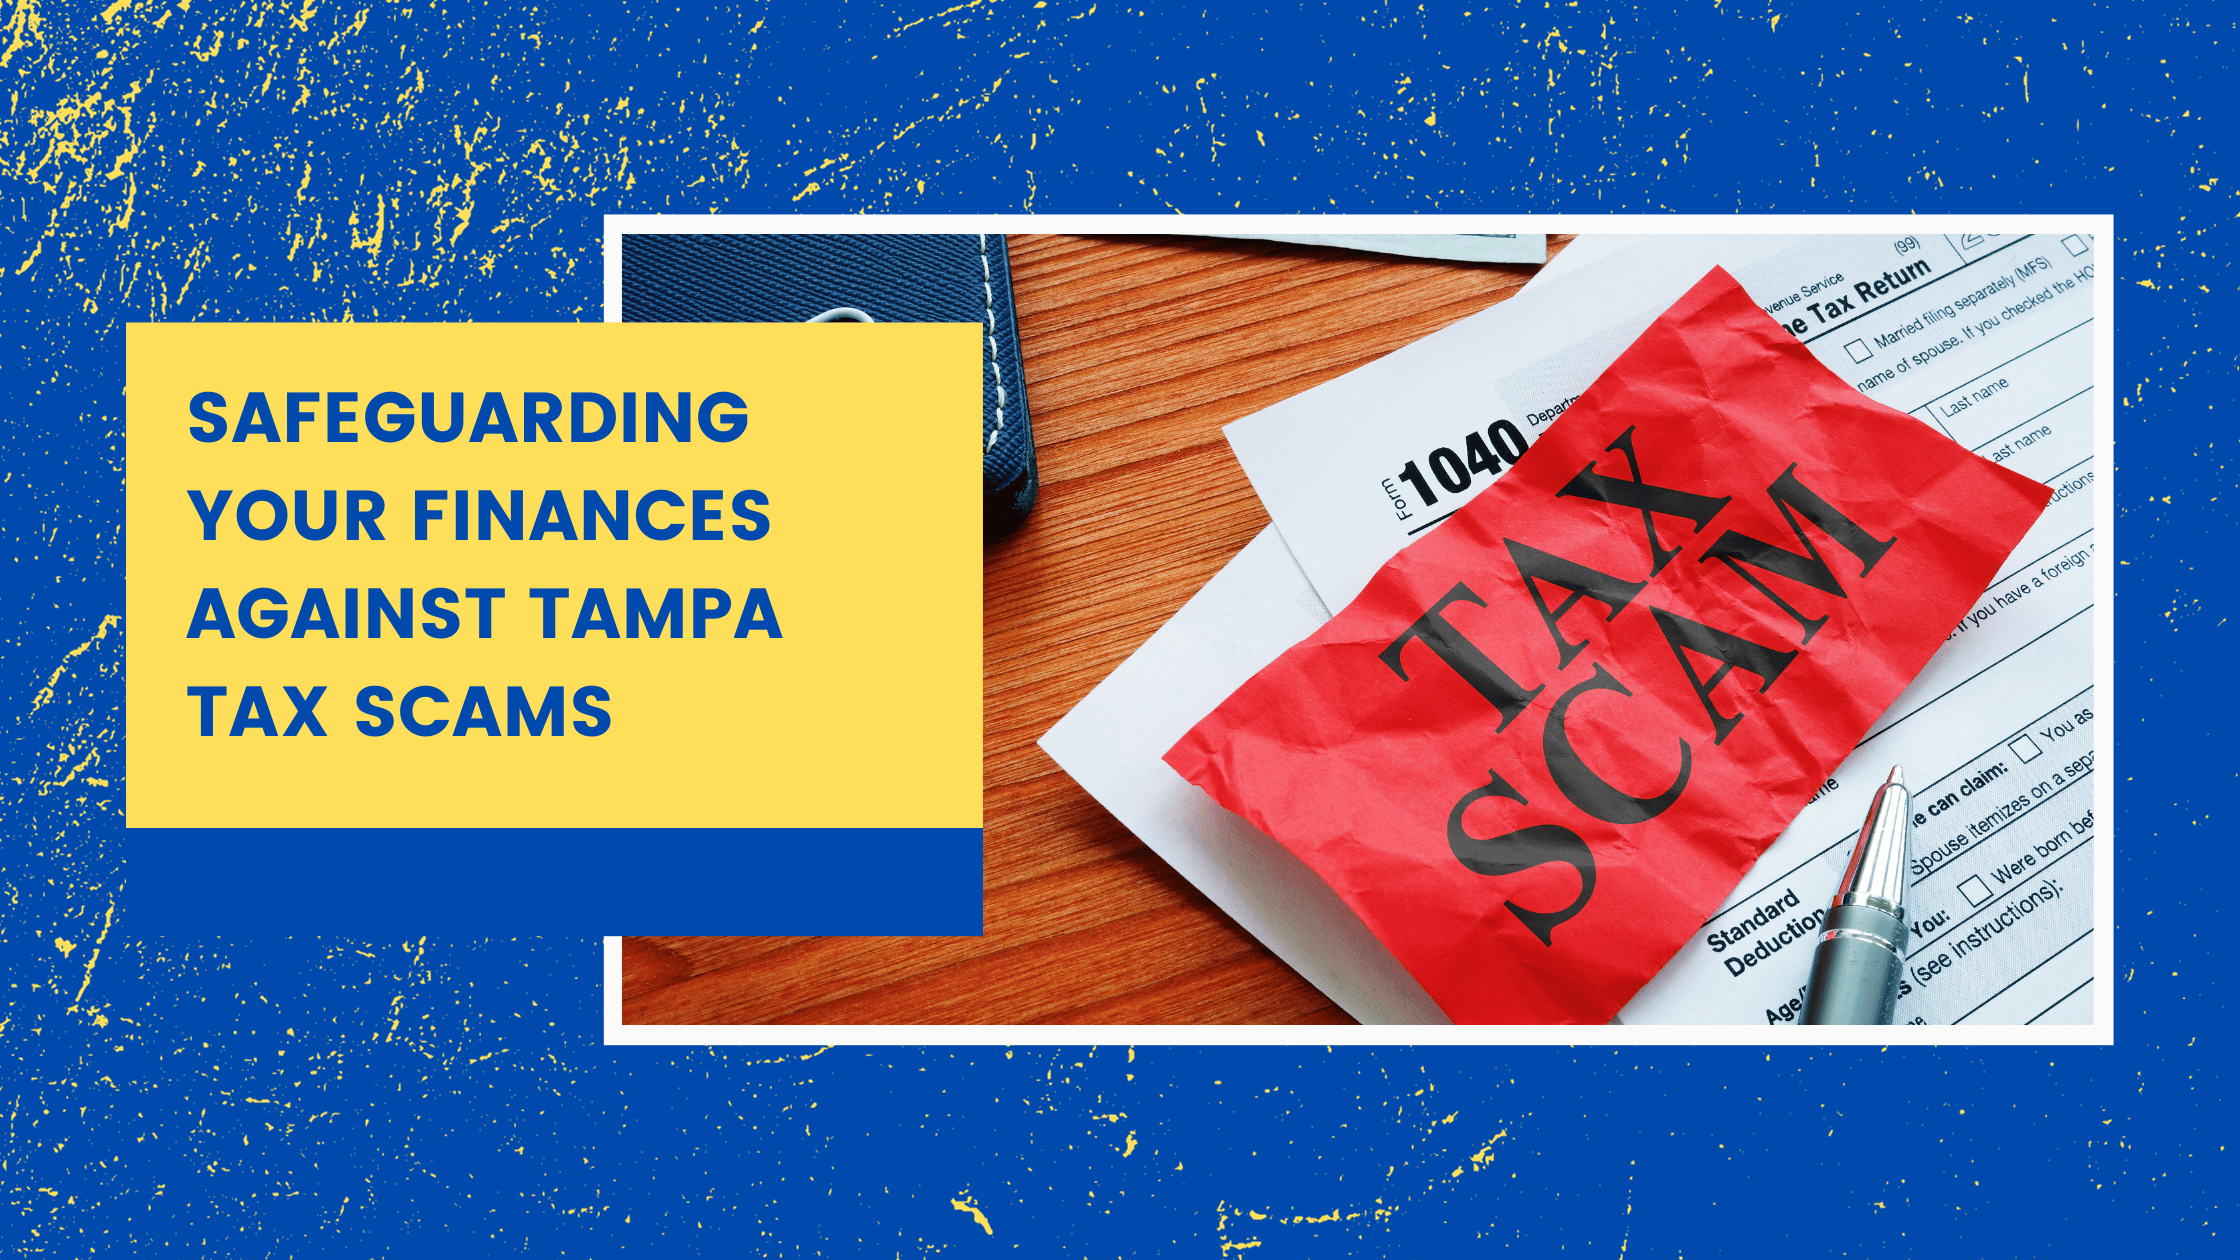 Safeguarding Your Finances Against Tampa Tax Scams